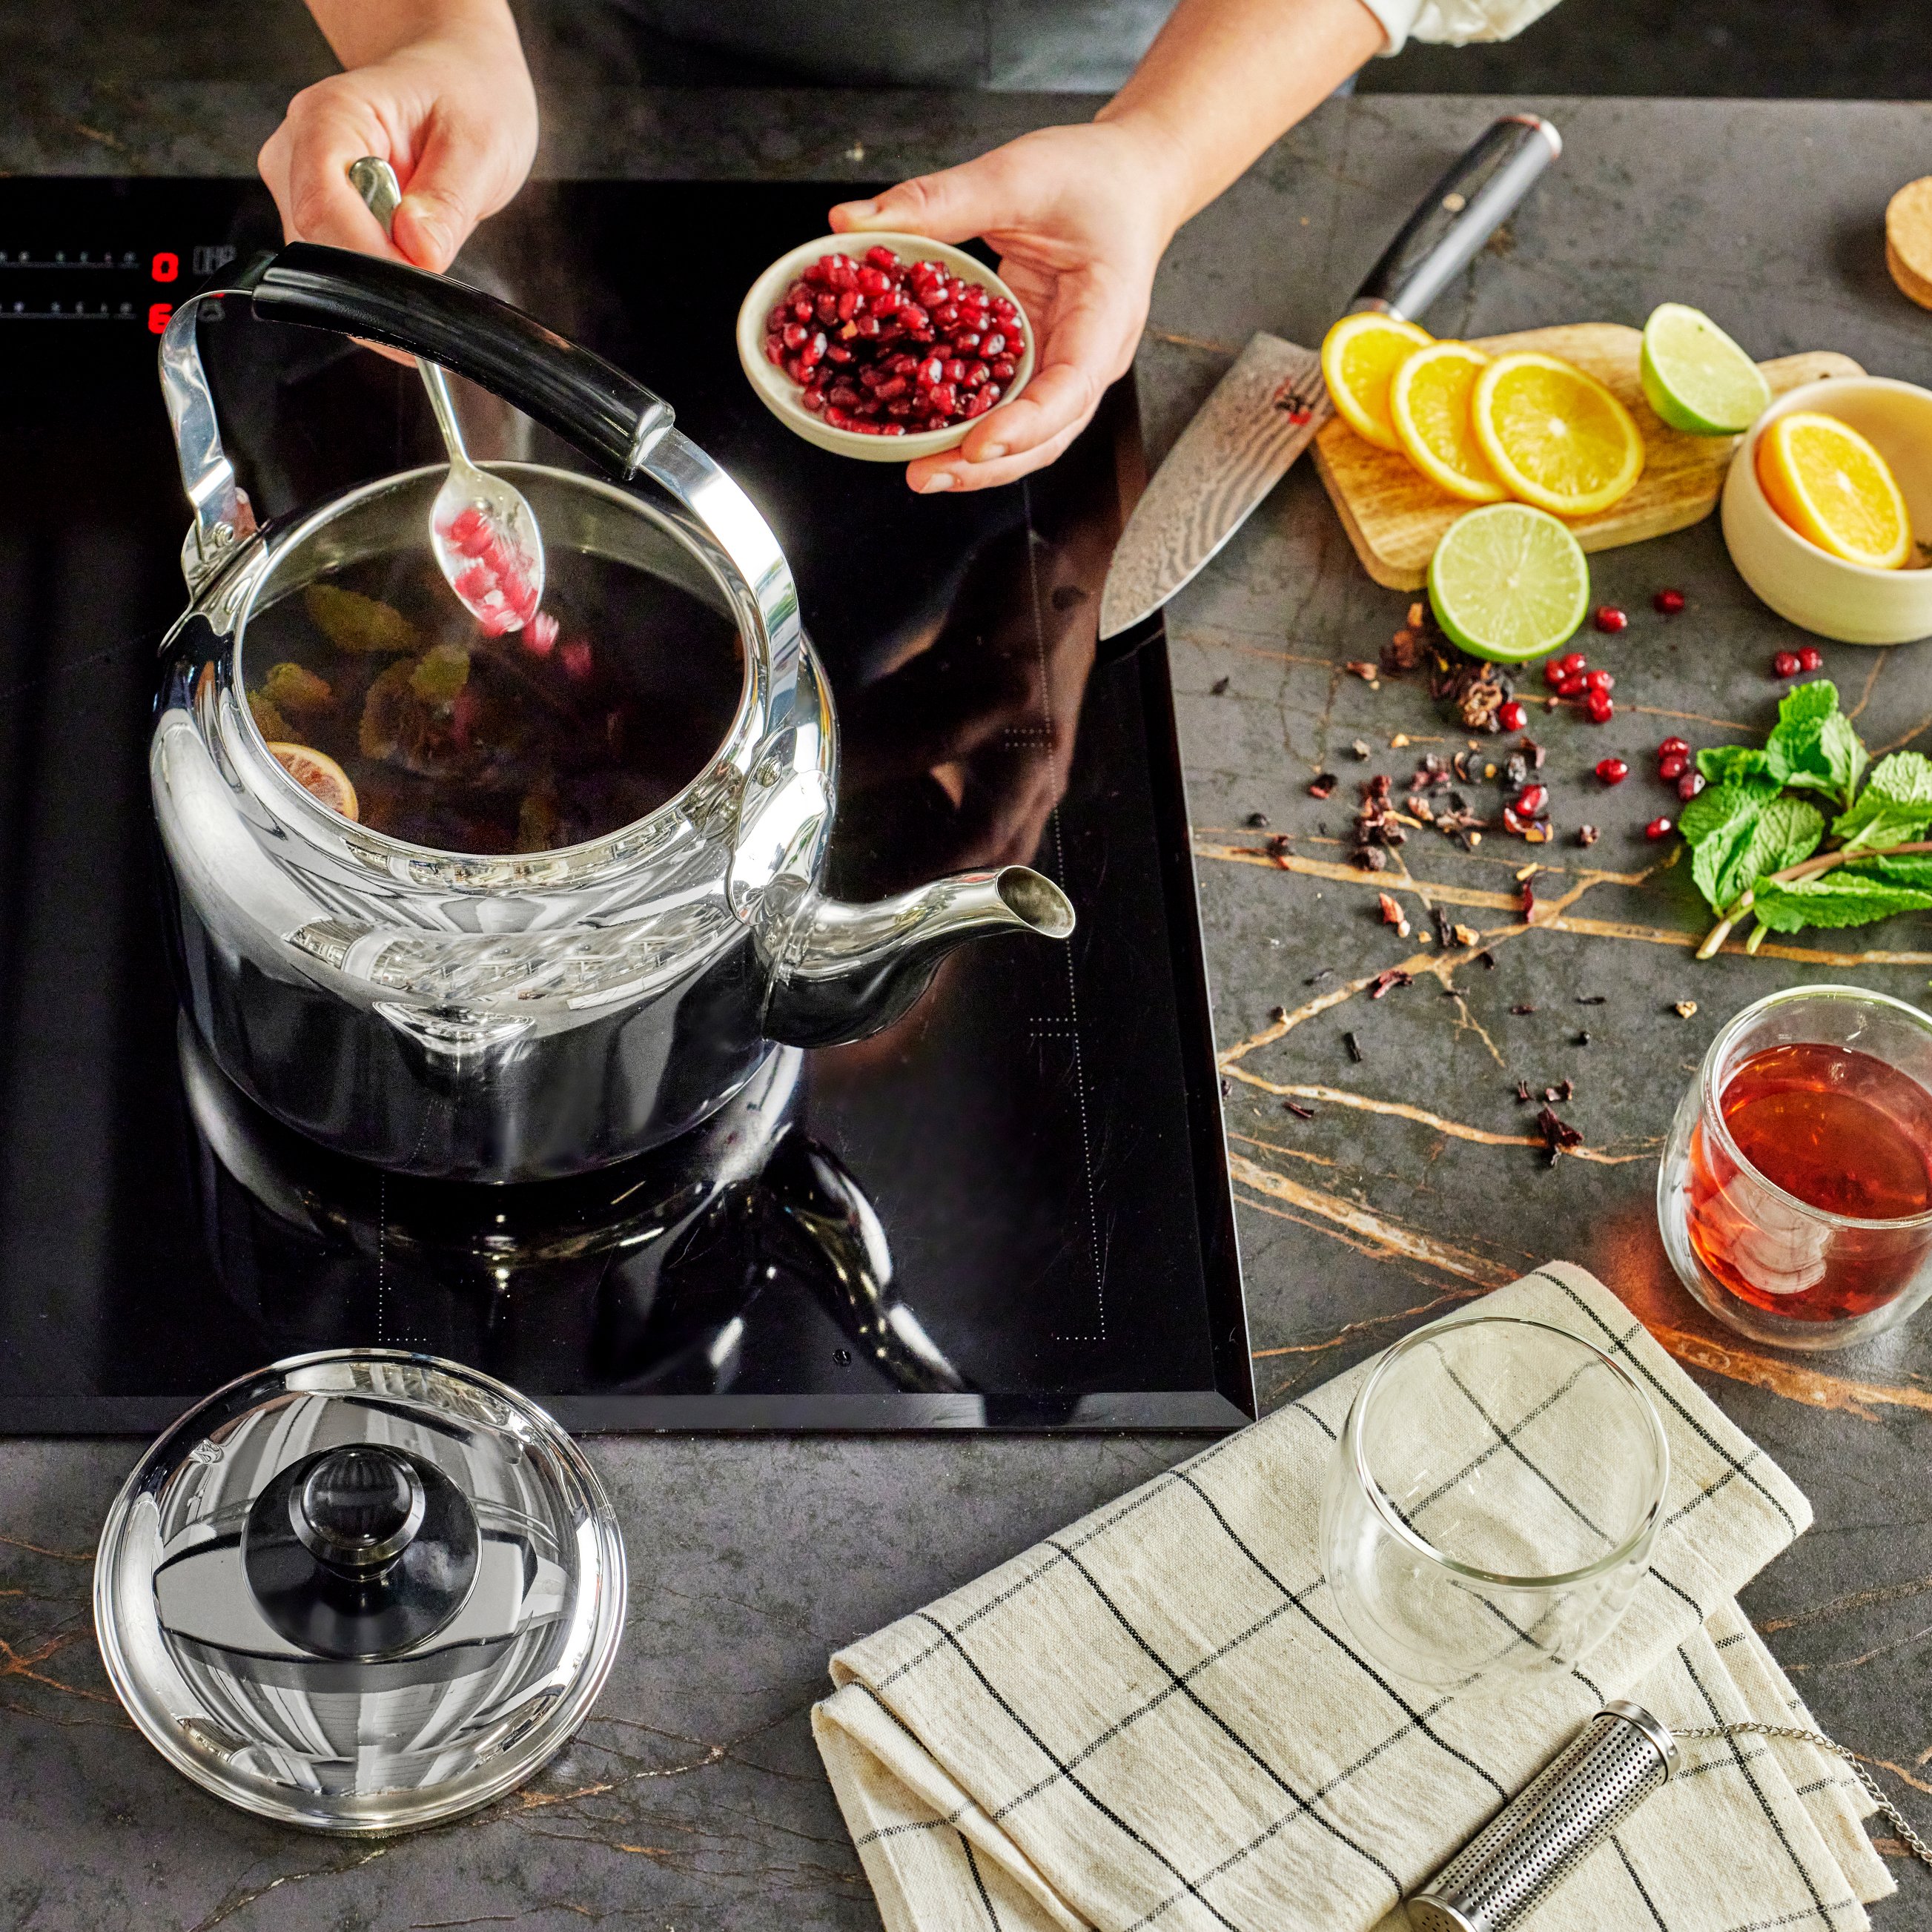 https://www.zwilling.com/on/demandware.static/-/Sites-zwilling-us-Library/default/dw16ff4f35/images/product-content/masonry-content/demeyere/cookware/specialties/DE_Resto_Tea_Kettle_5.jpg